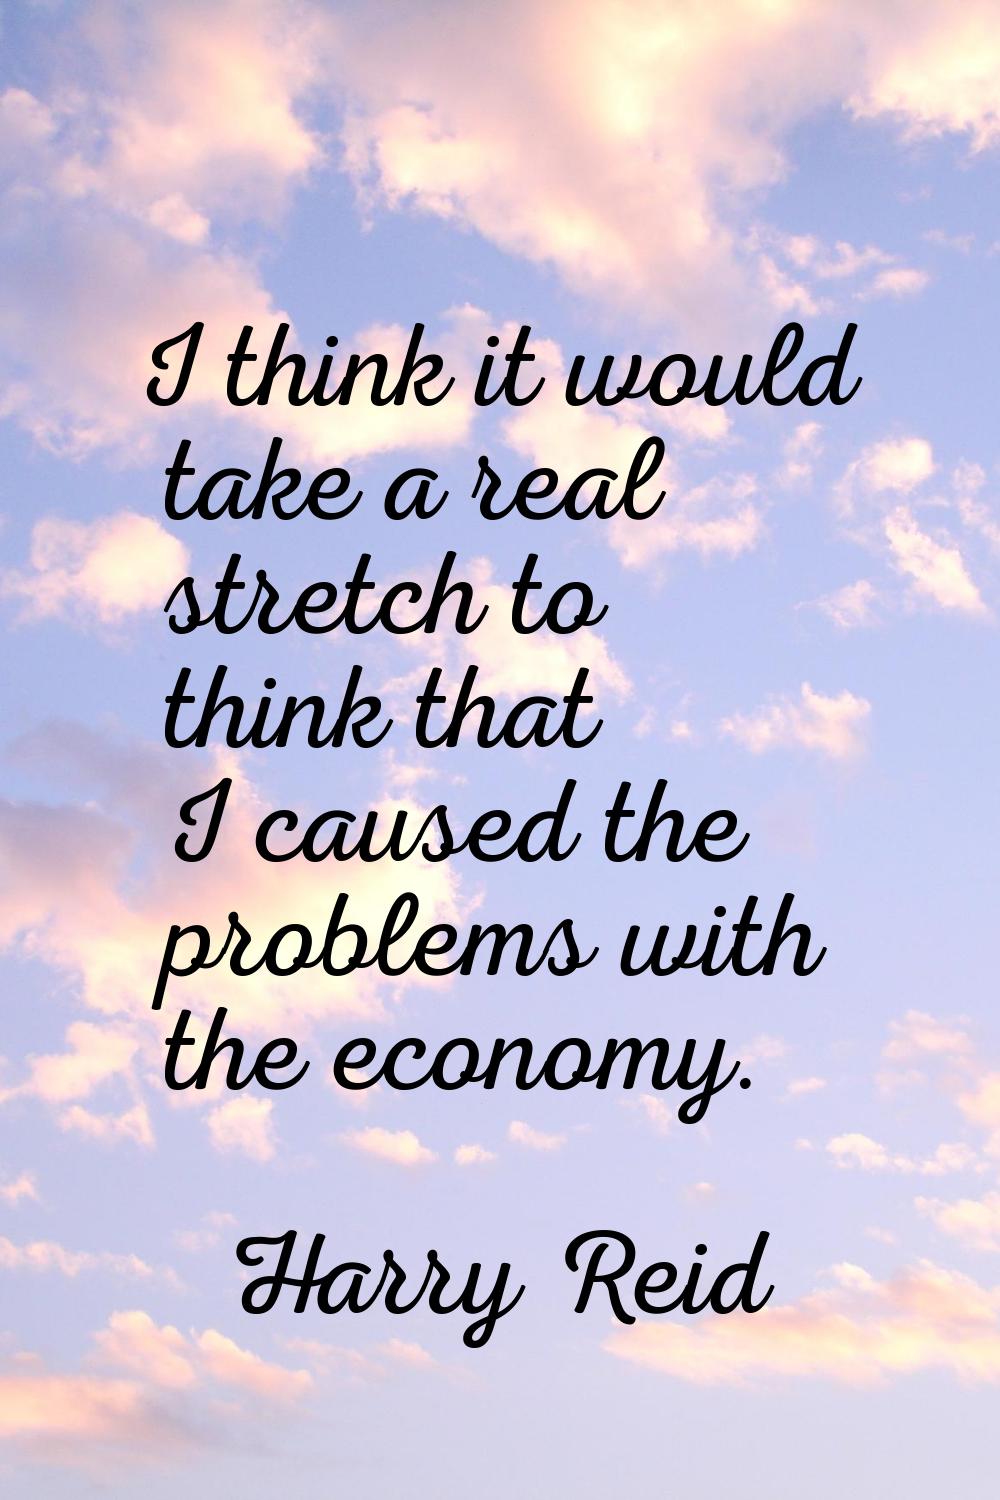 I think it would take a real stretch to think that I caused the problems with the economy.